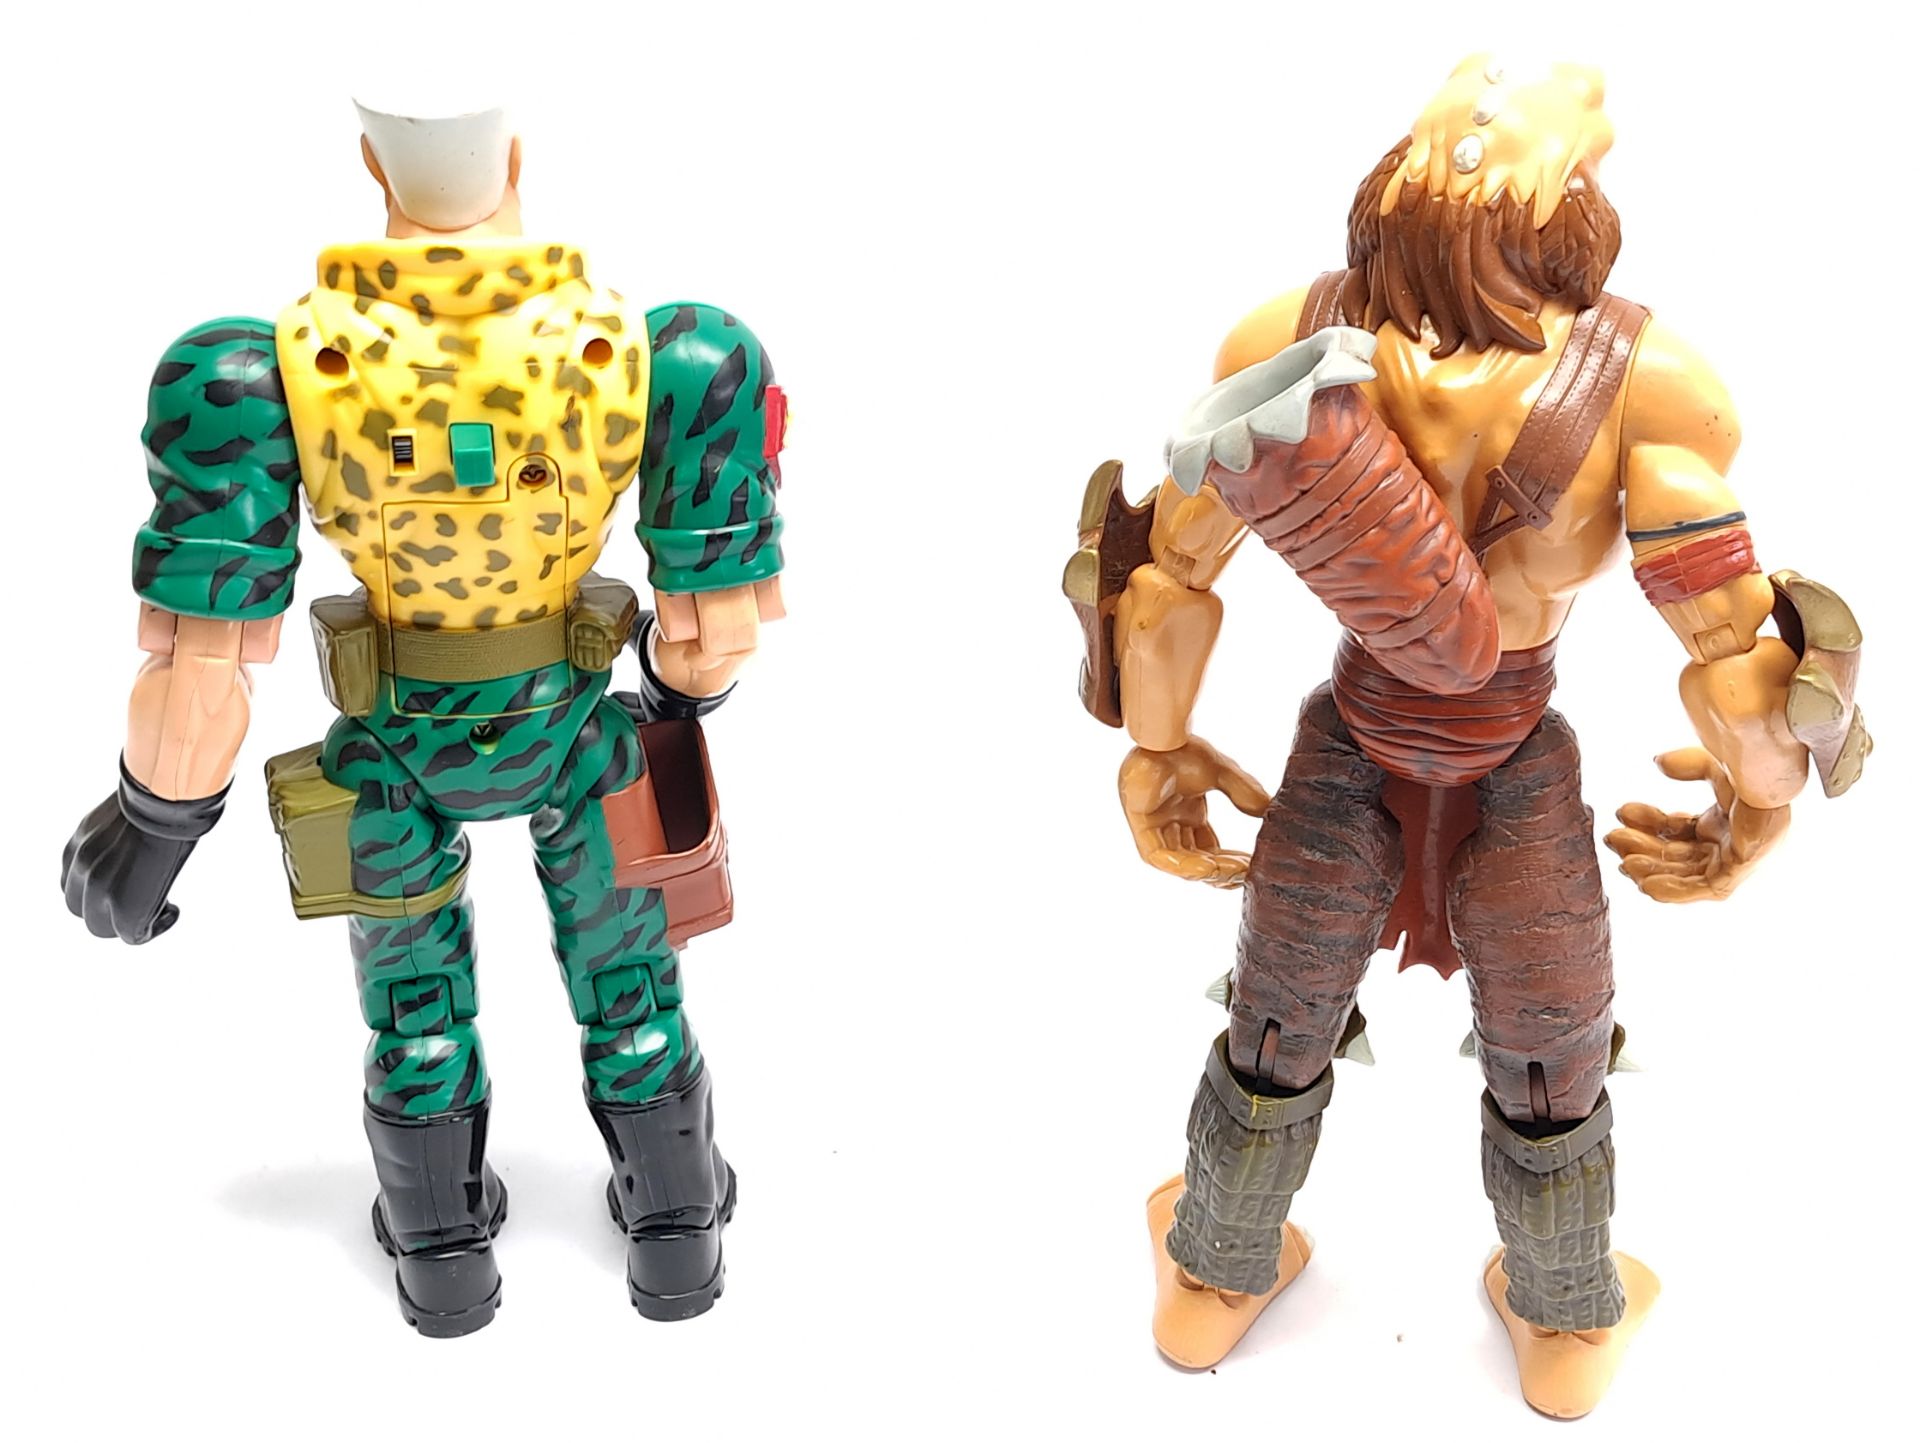 Hasbro Small Soldiers pair, 12 inch loose action figures (1) Archer - Gorgonite Leader, (2) Major... - Image 2 of 2